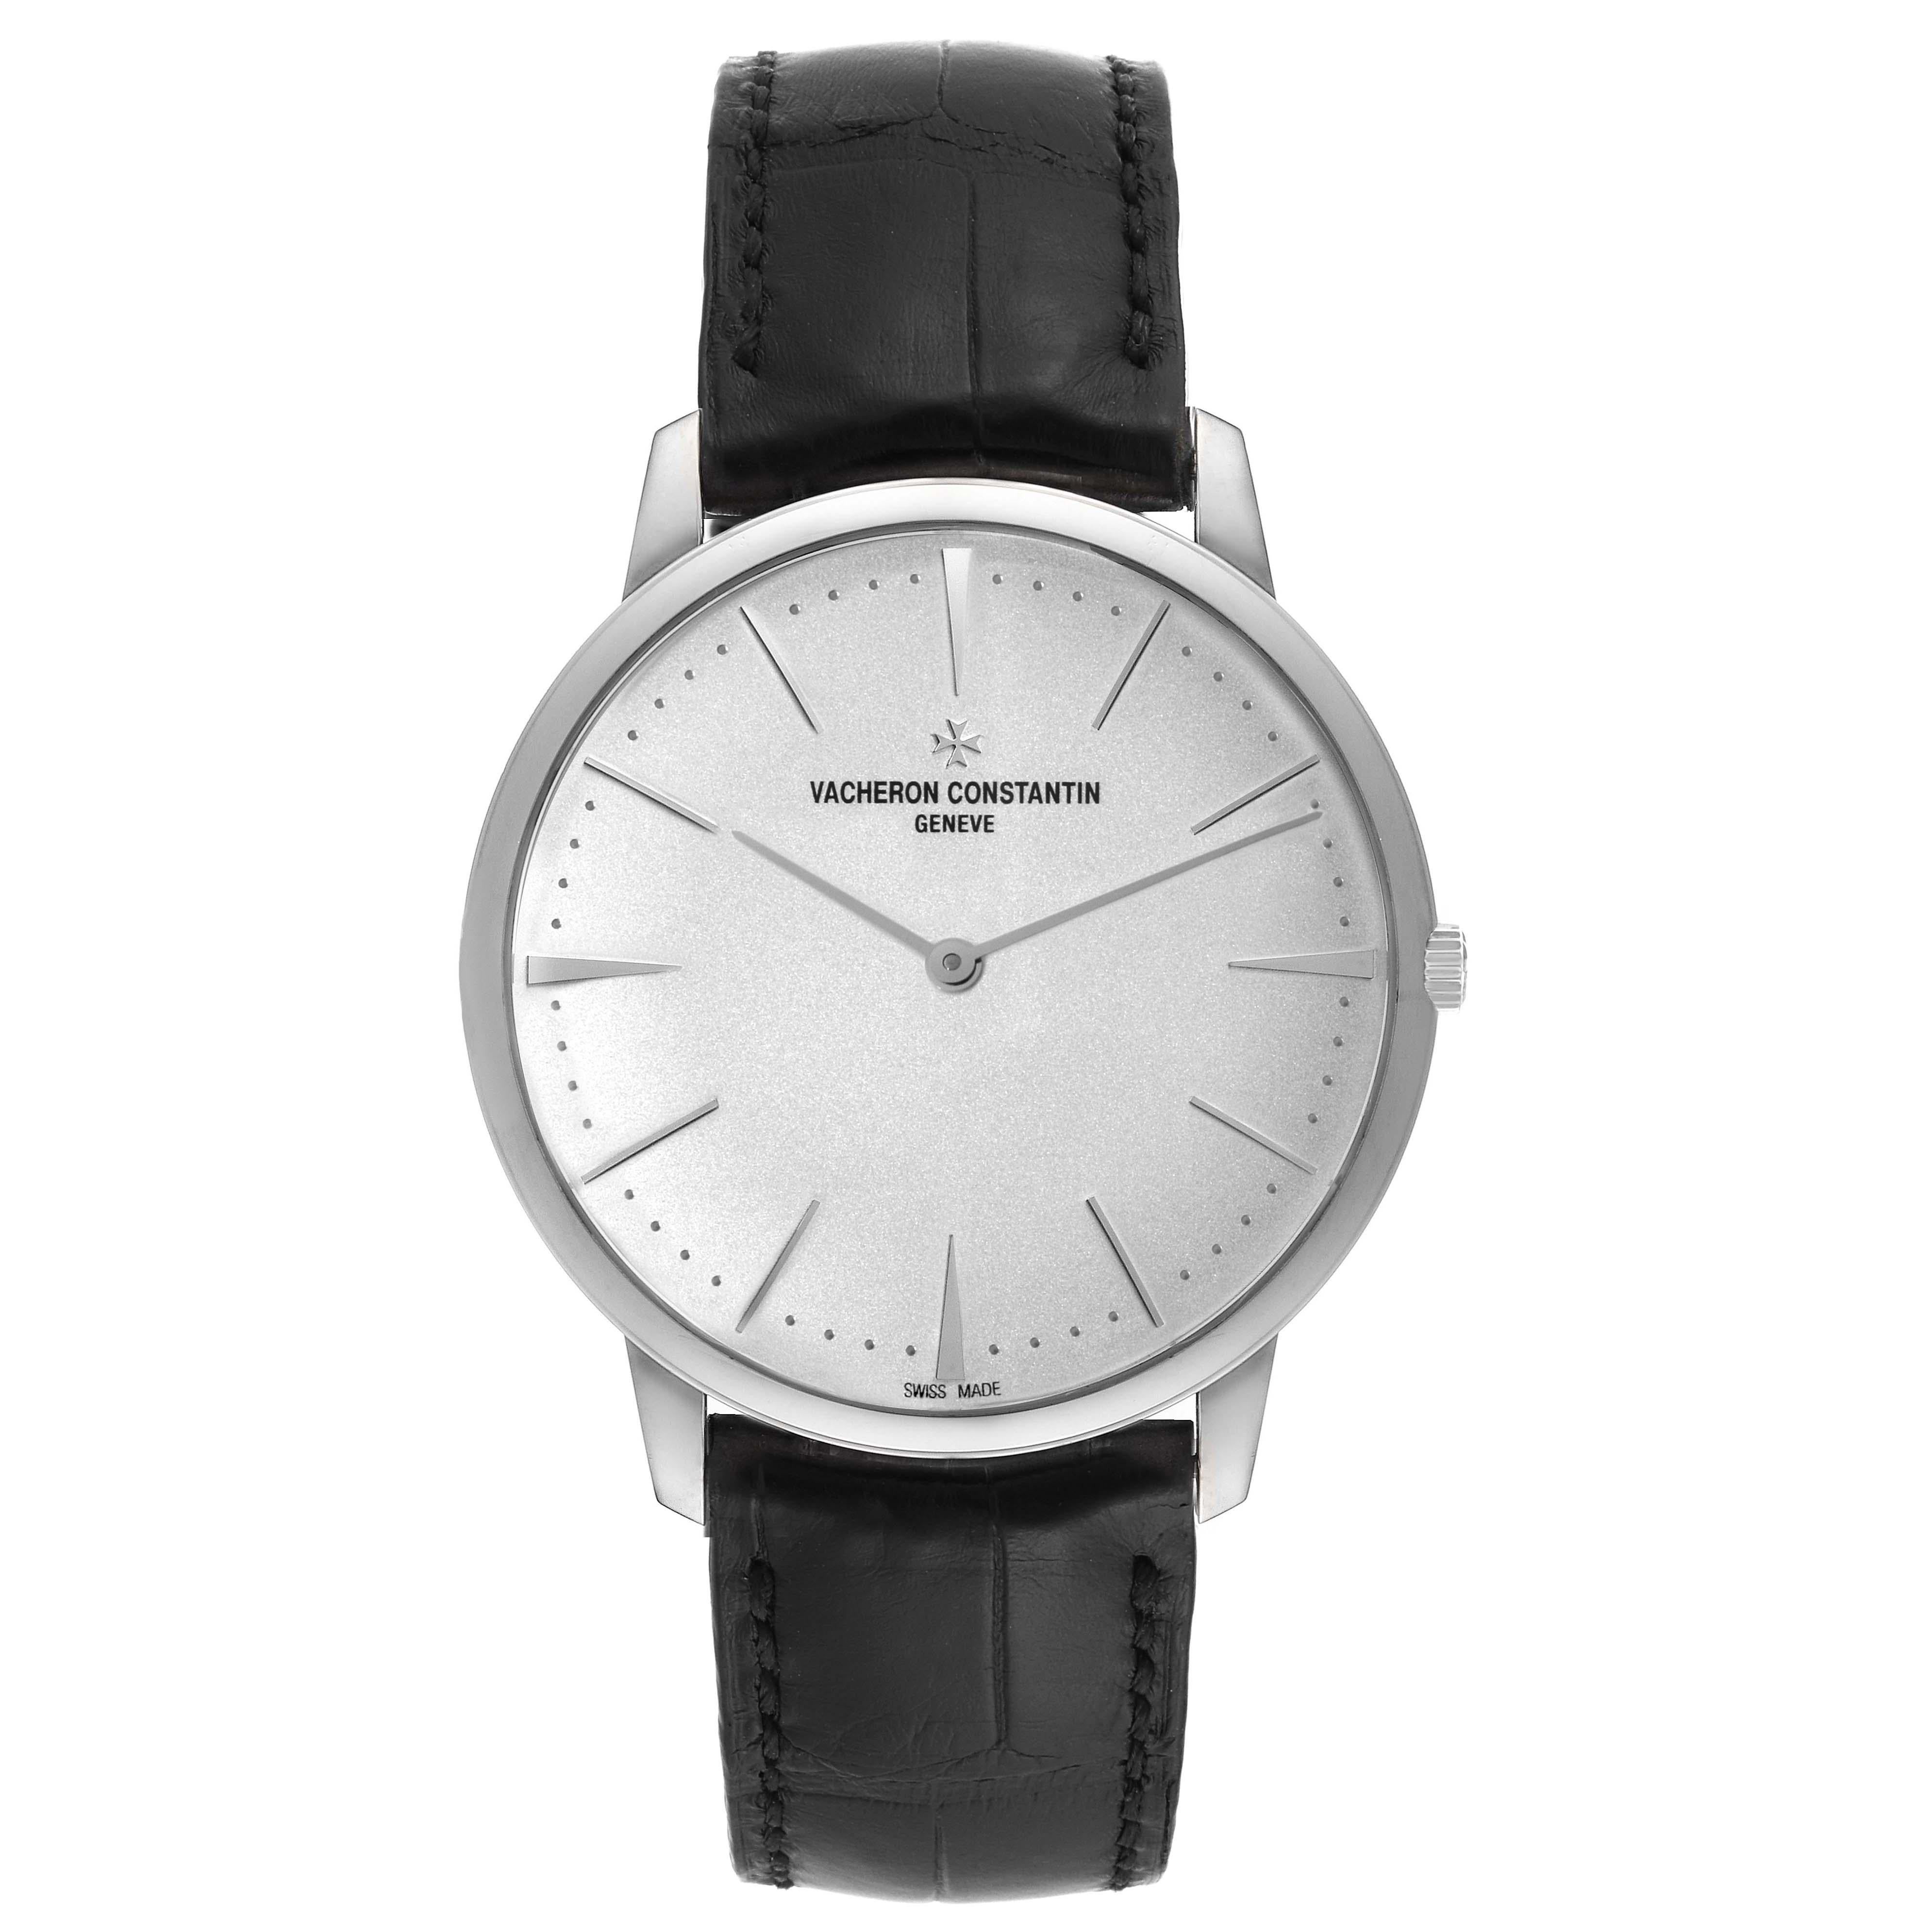 Vacheron Constantin Patrimony Grand Taille White Gold Mens Watch 81180. Manual winding movement. 18k white gold case 40 mm in diameter.  Case thickness 6.7 mm. 18k white gold smooth bezel. Scratch resistant sapphire crystal. Silver dial with baton